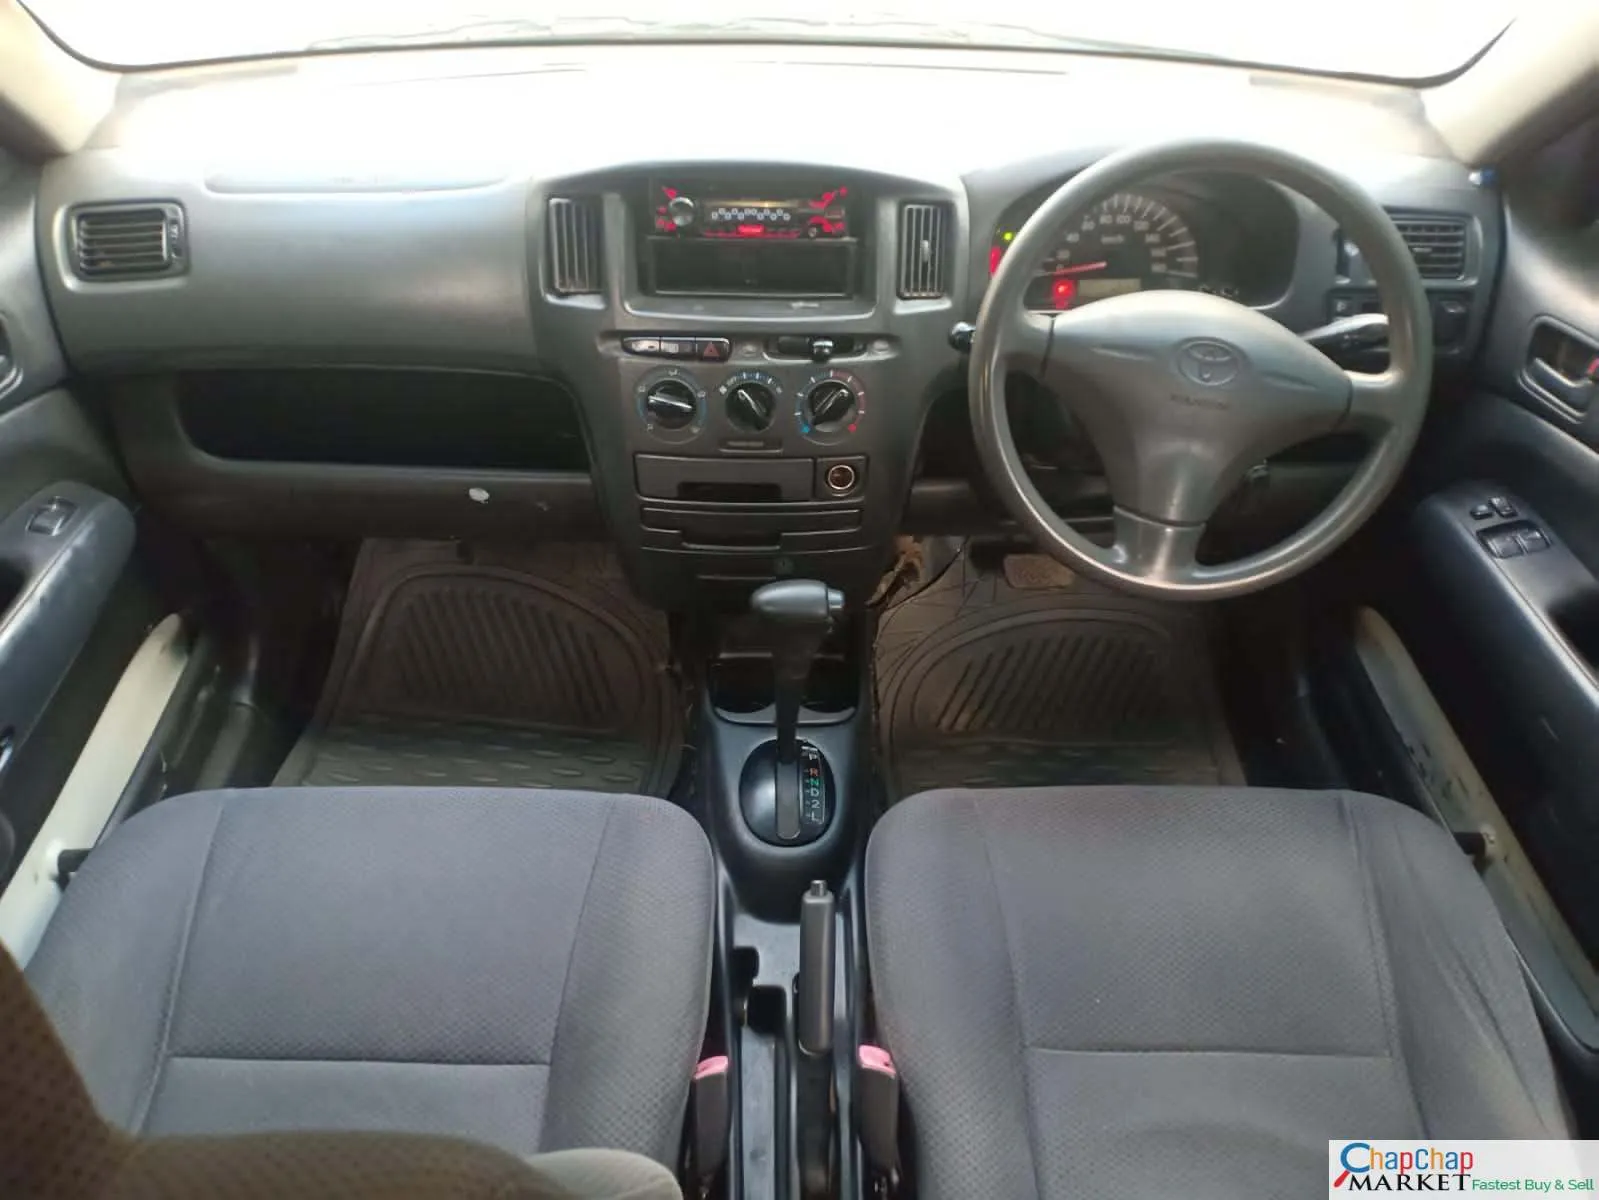 Toyota PROBOX for sale in Kenya QUICK SALE You Pay 30% Deposit Trade in OK EXCLUSIVE